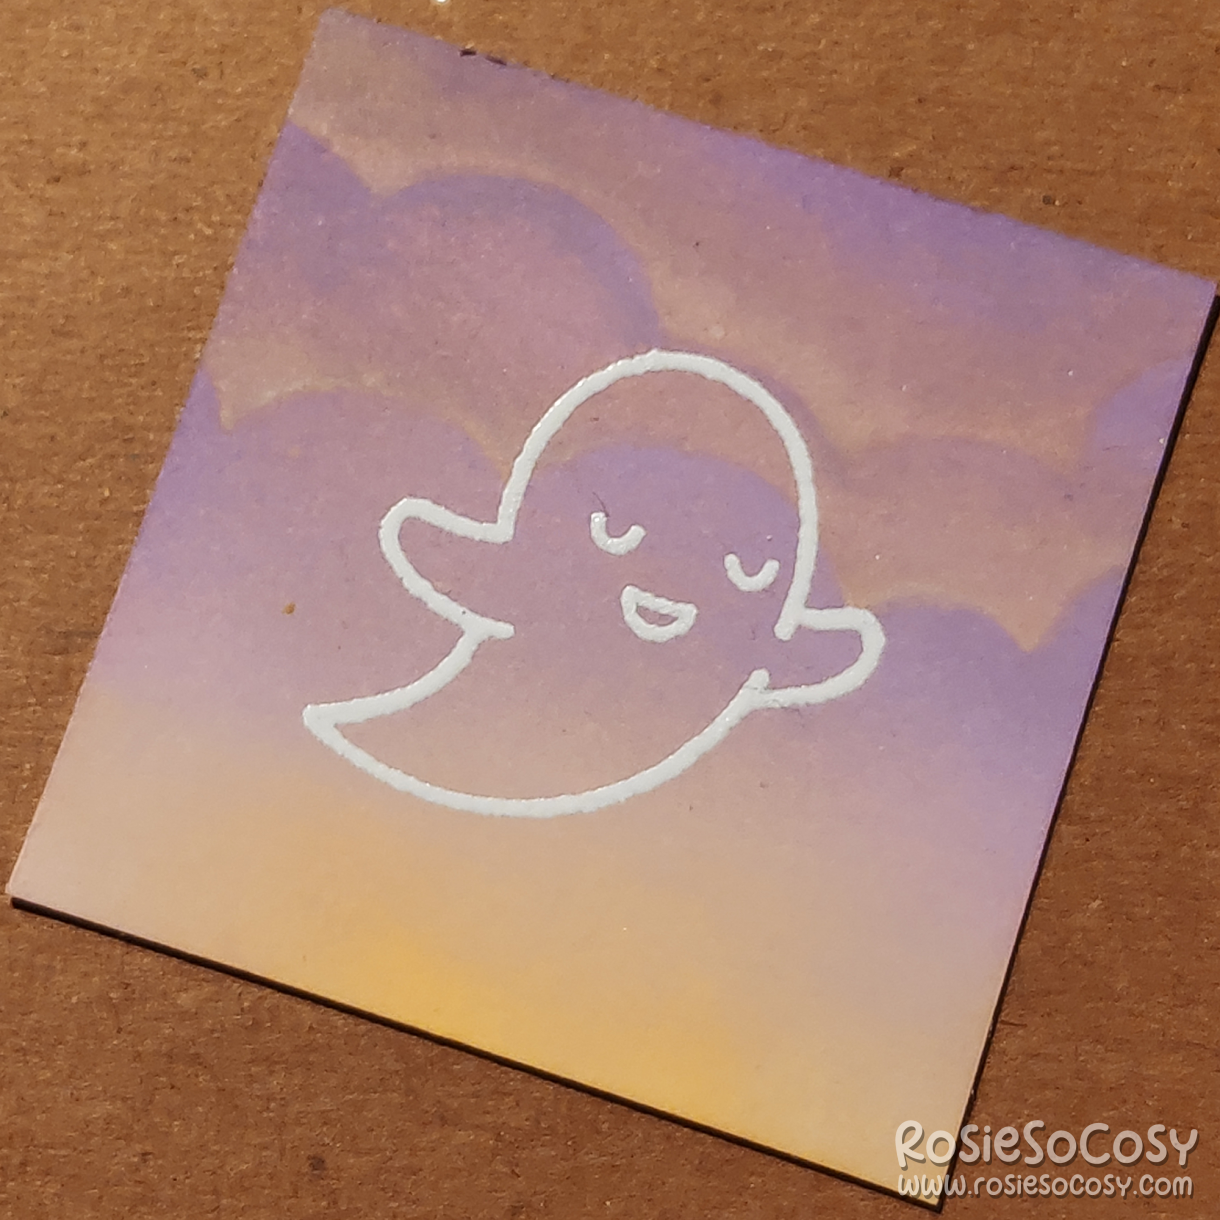 A tiny 2 inch card with a translucent (white outlined) ghost, who is seemingly peaceful, on a soft purple and yellow cloudy background.